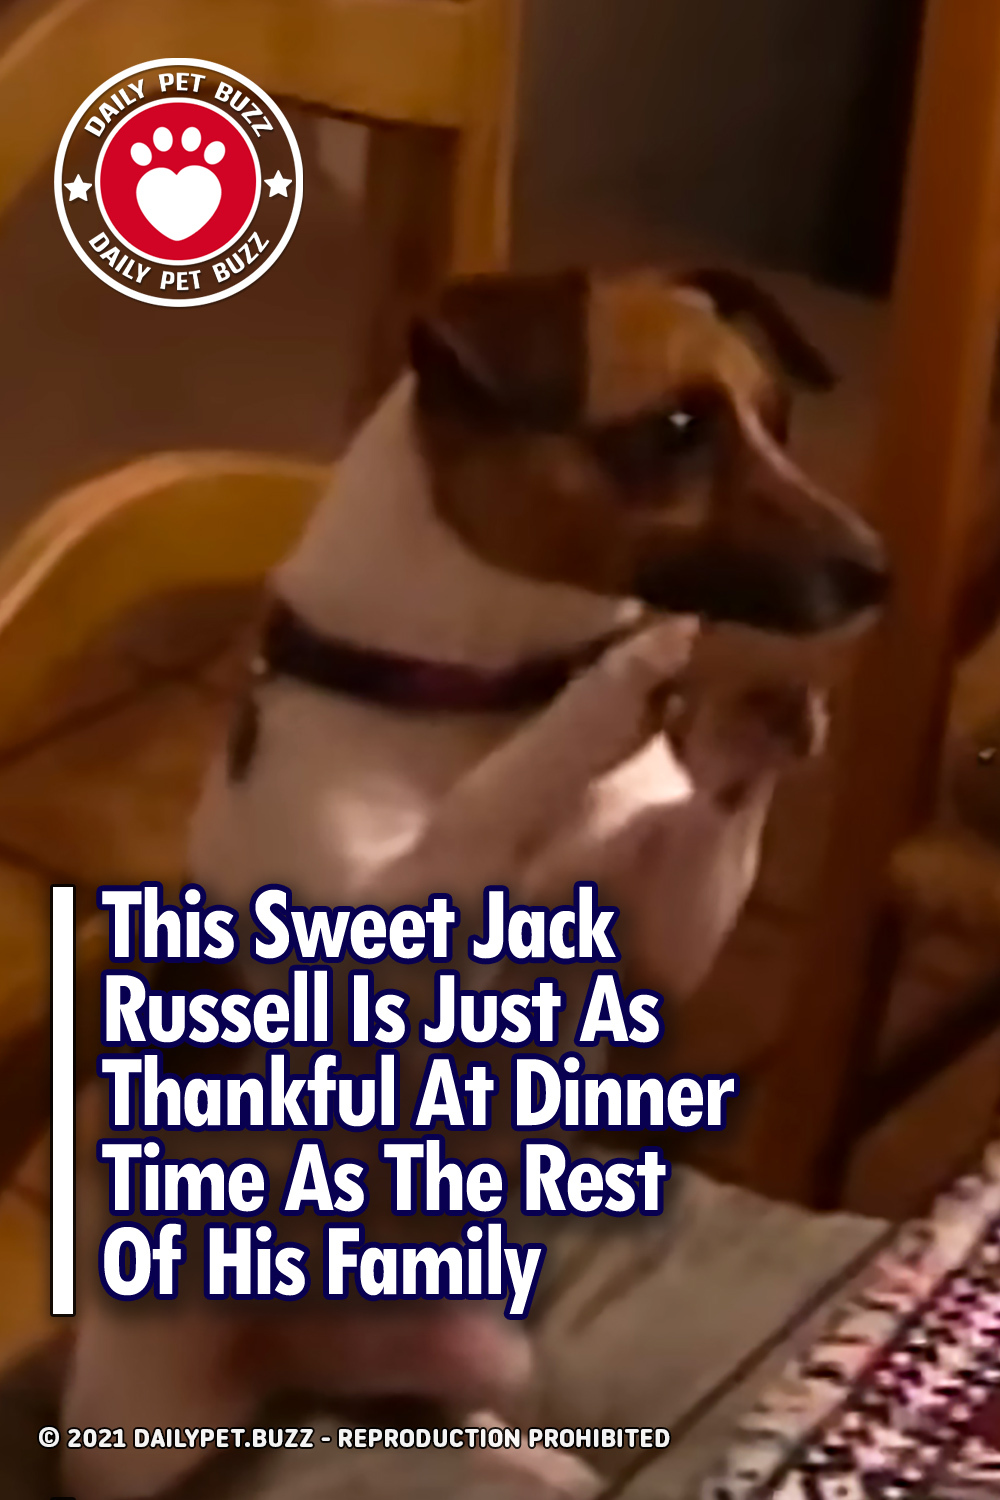 This Sweet Jack Russell Is Just As Thankful At Dinner Time As The Rest Of His Family